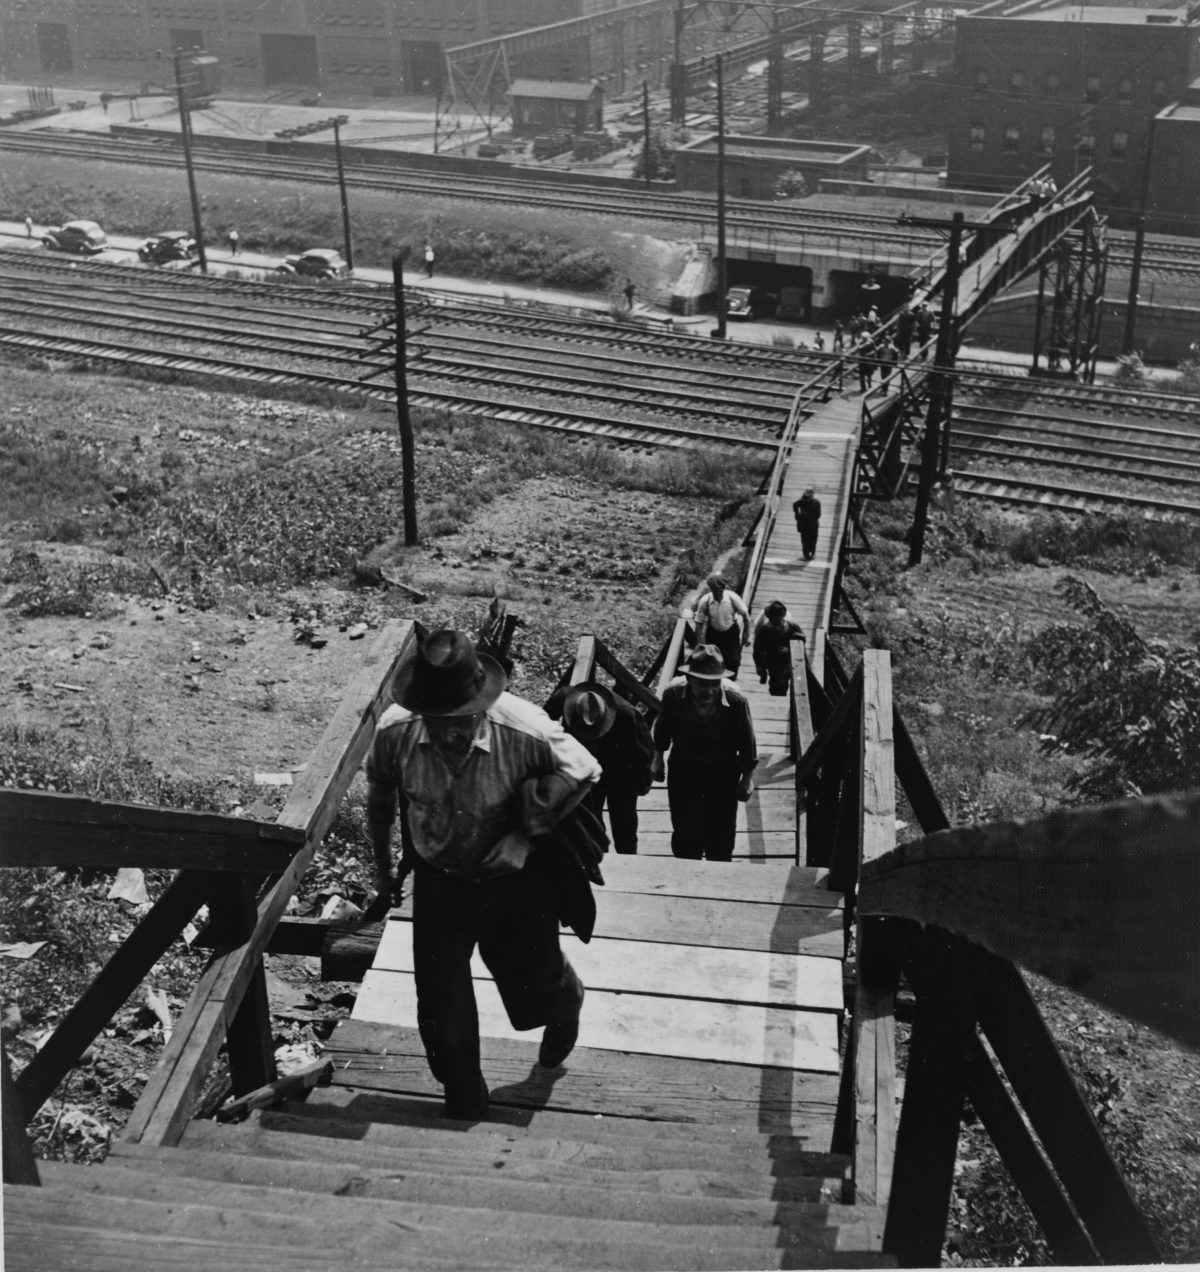 Workers returning home in evening, Pittsburgh, Pennsylvania, 1935